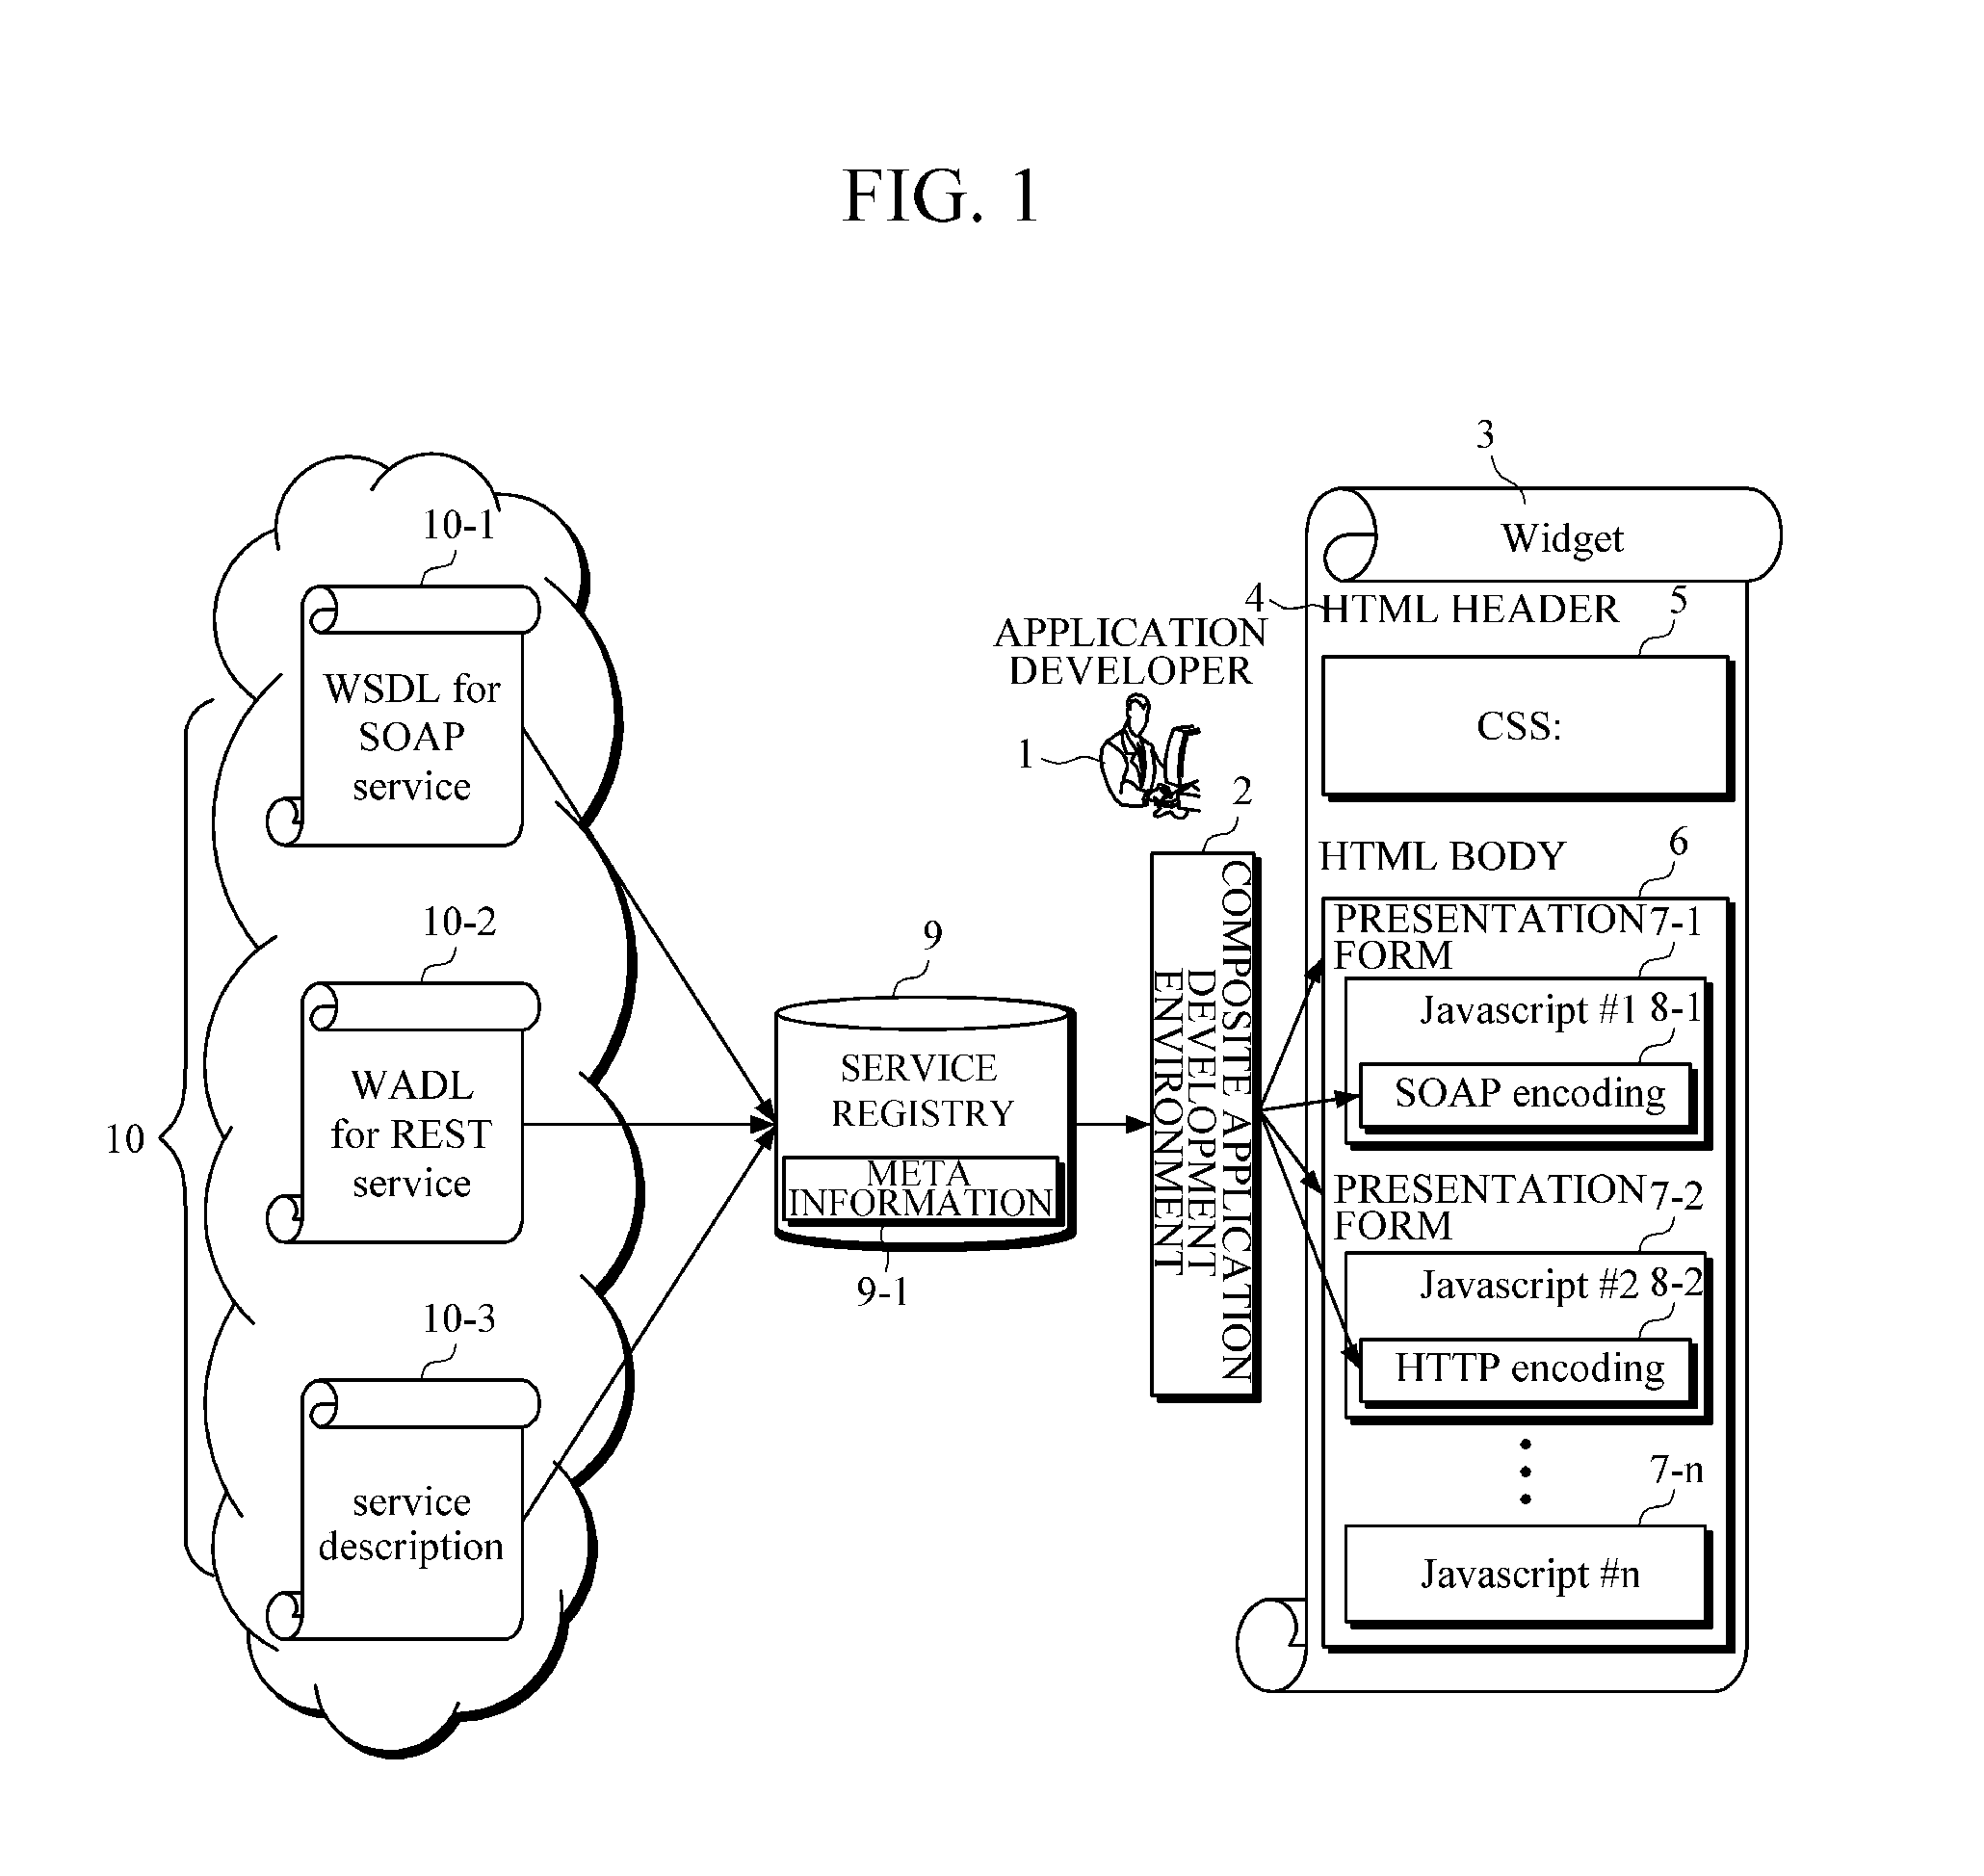 Automatic widget creation apparatus and method for invoking heterogeneous web services in a composite application